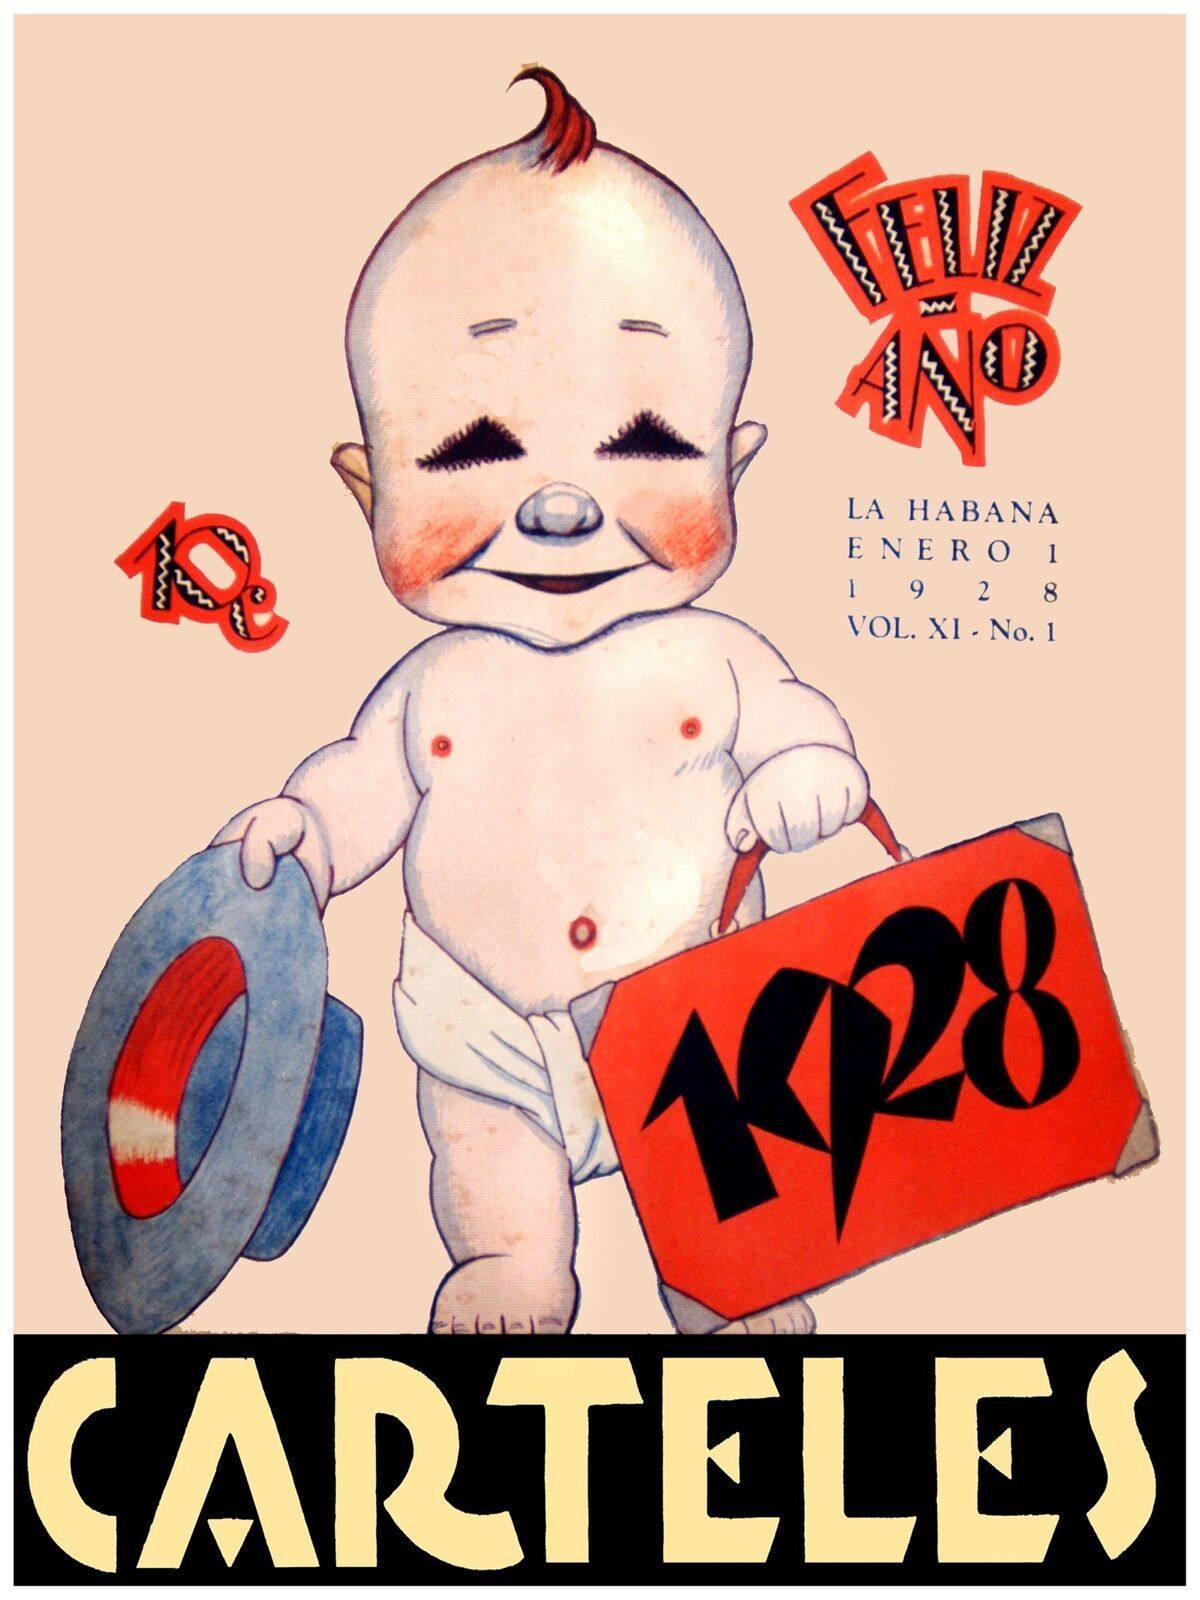 Quality Decoration 18x24 Poster.Room art.Creepy baby from 1928.6763 - $28.00